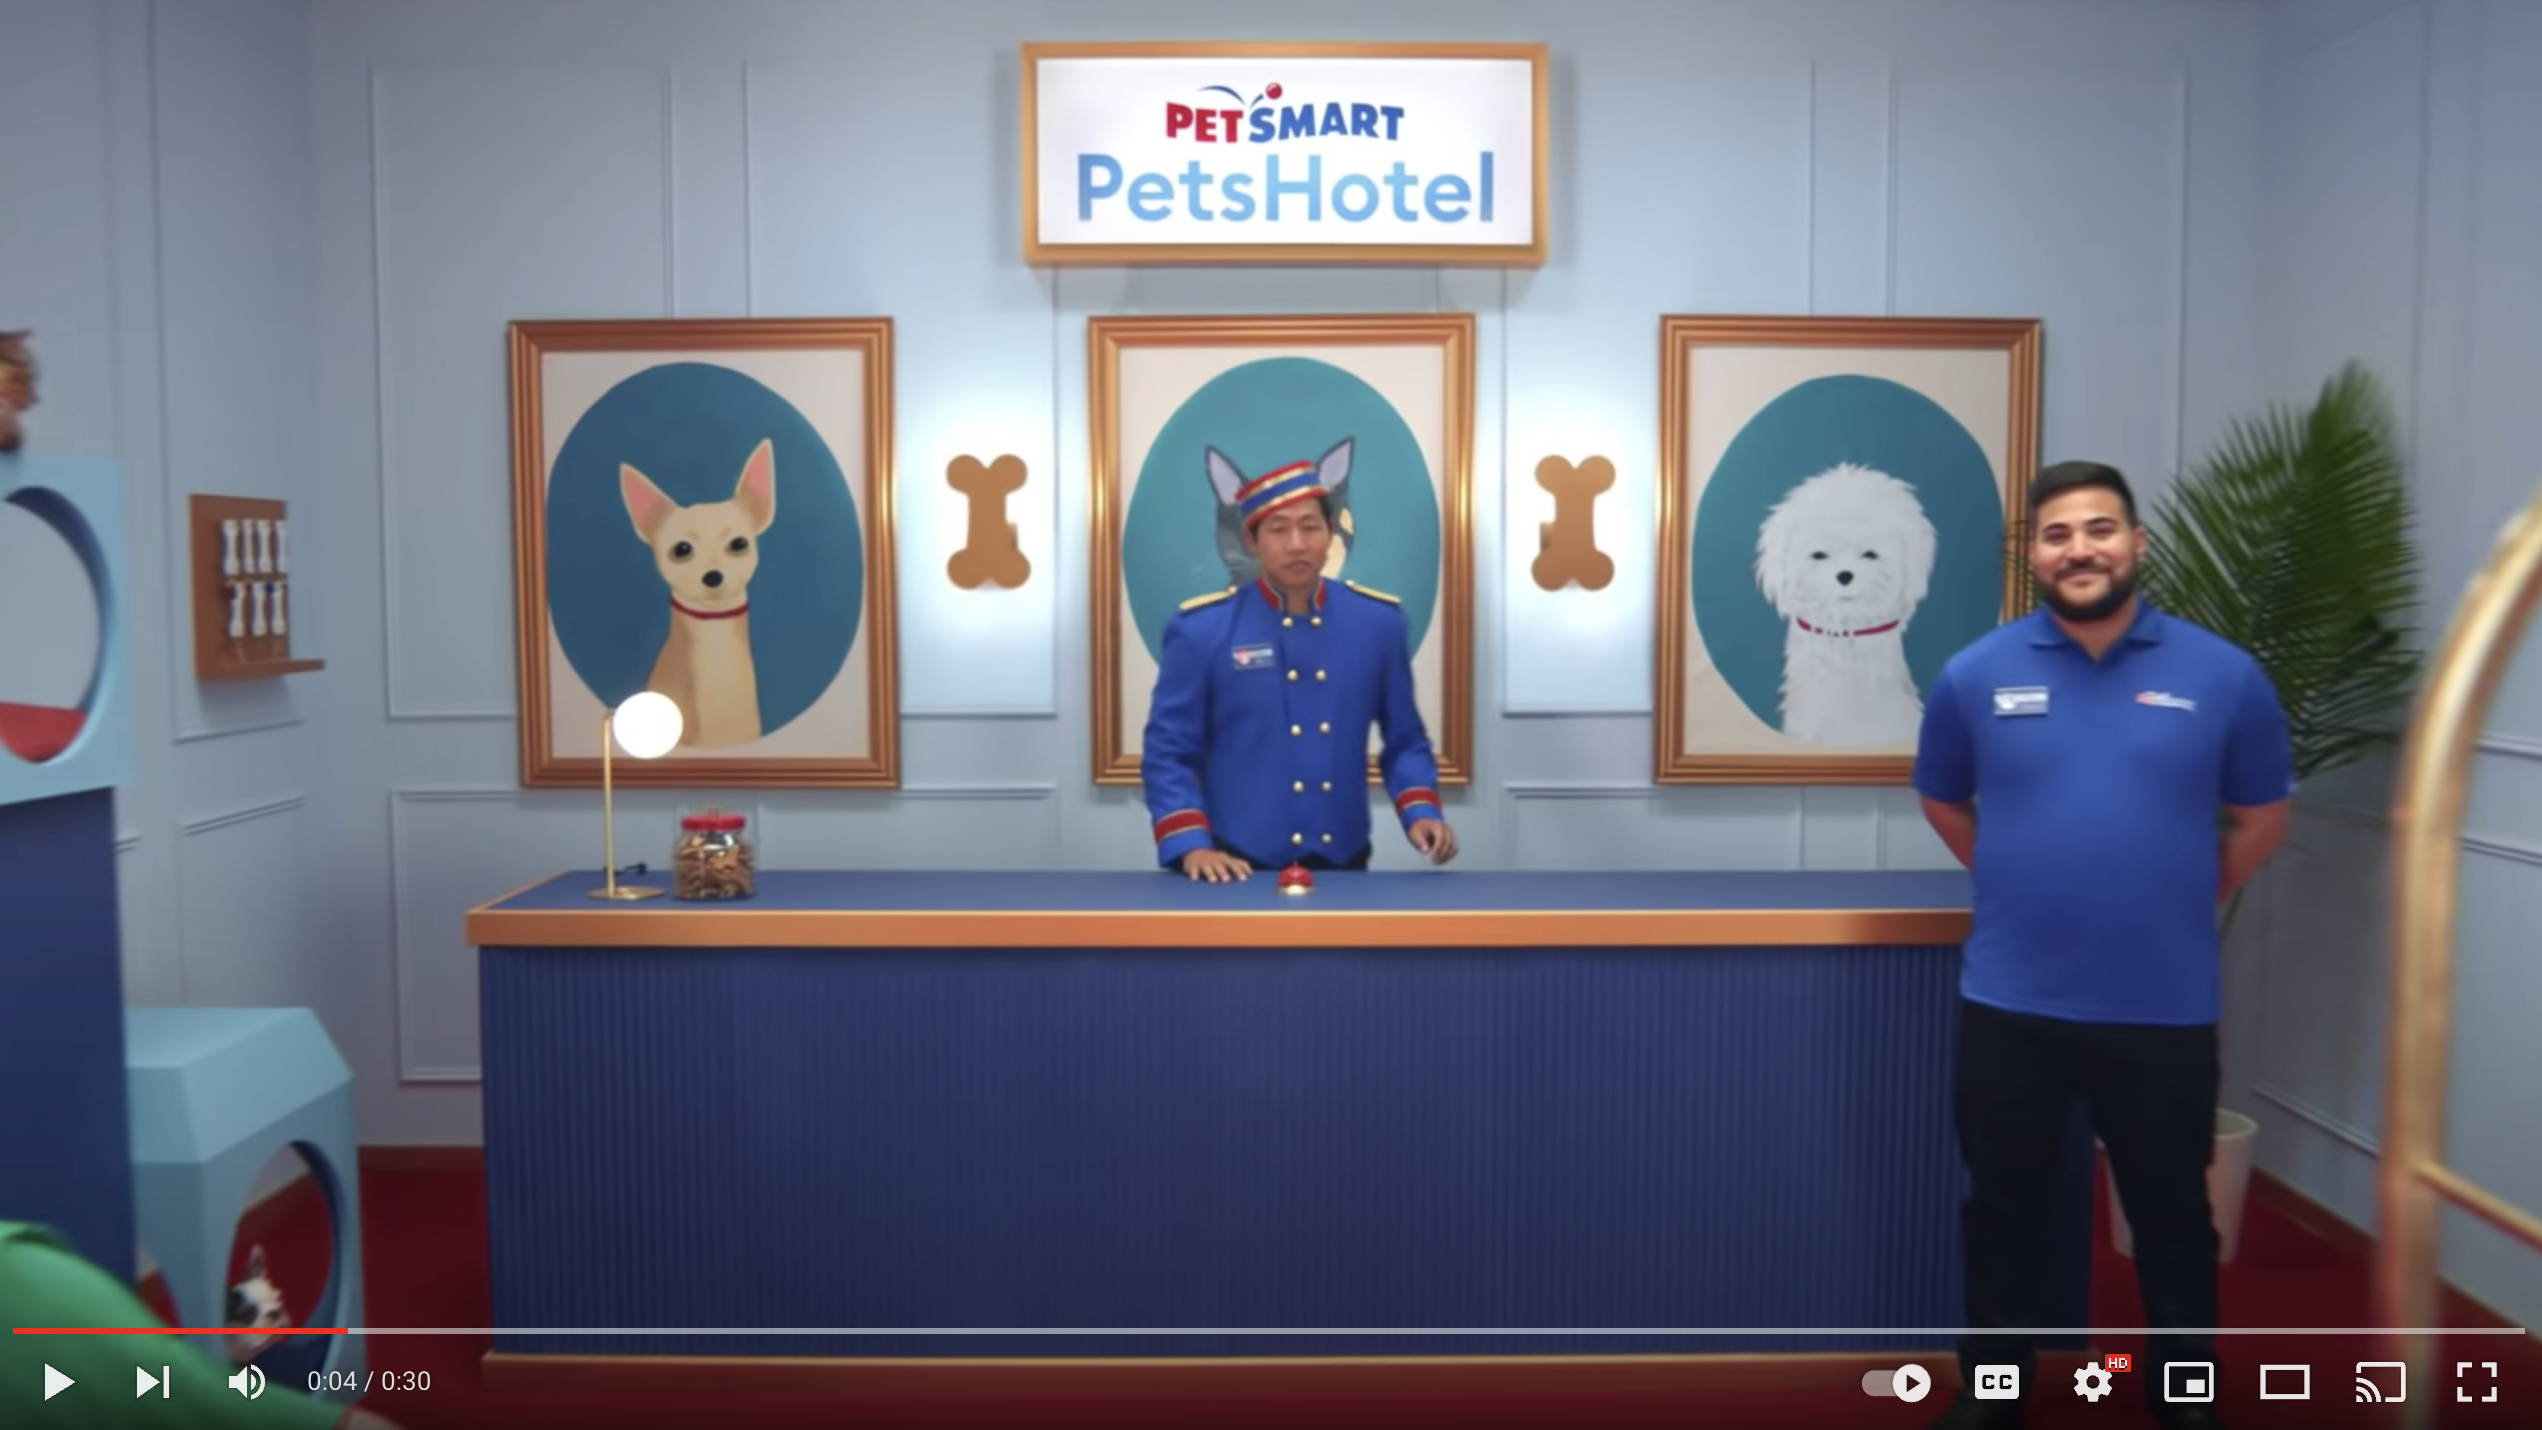 image of petsmart pet hotel from commercial